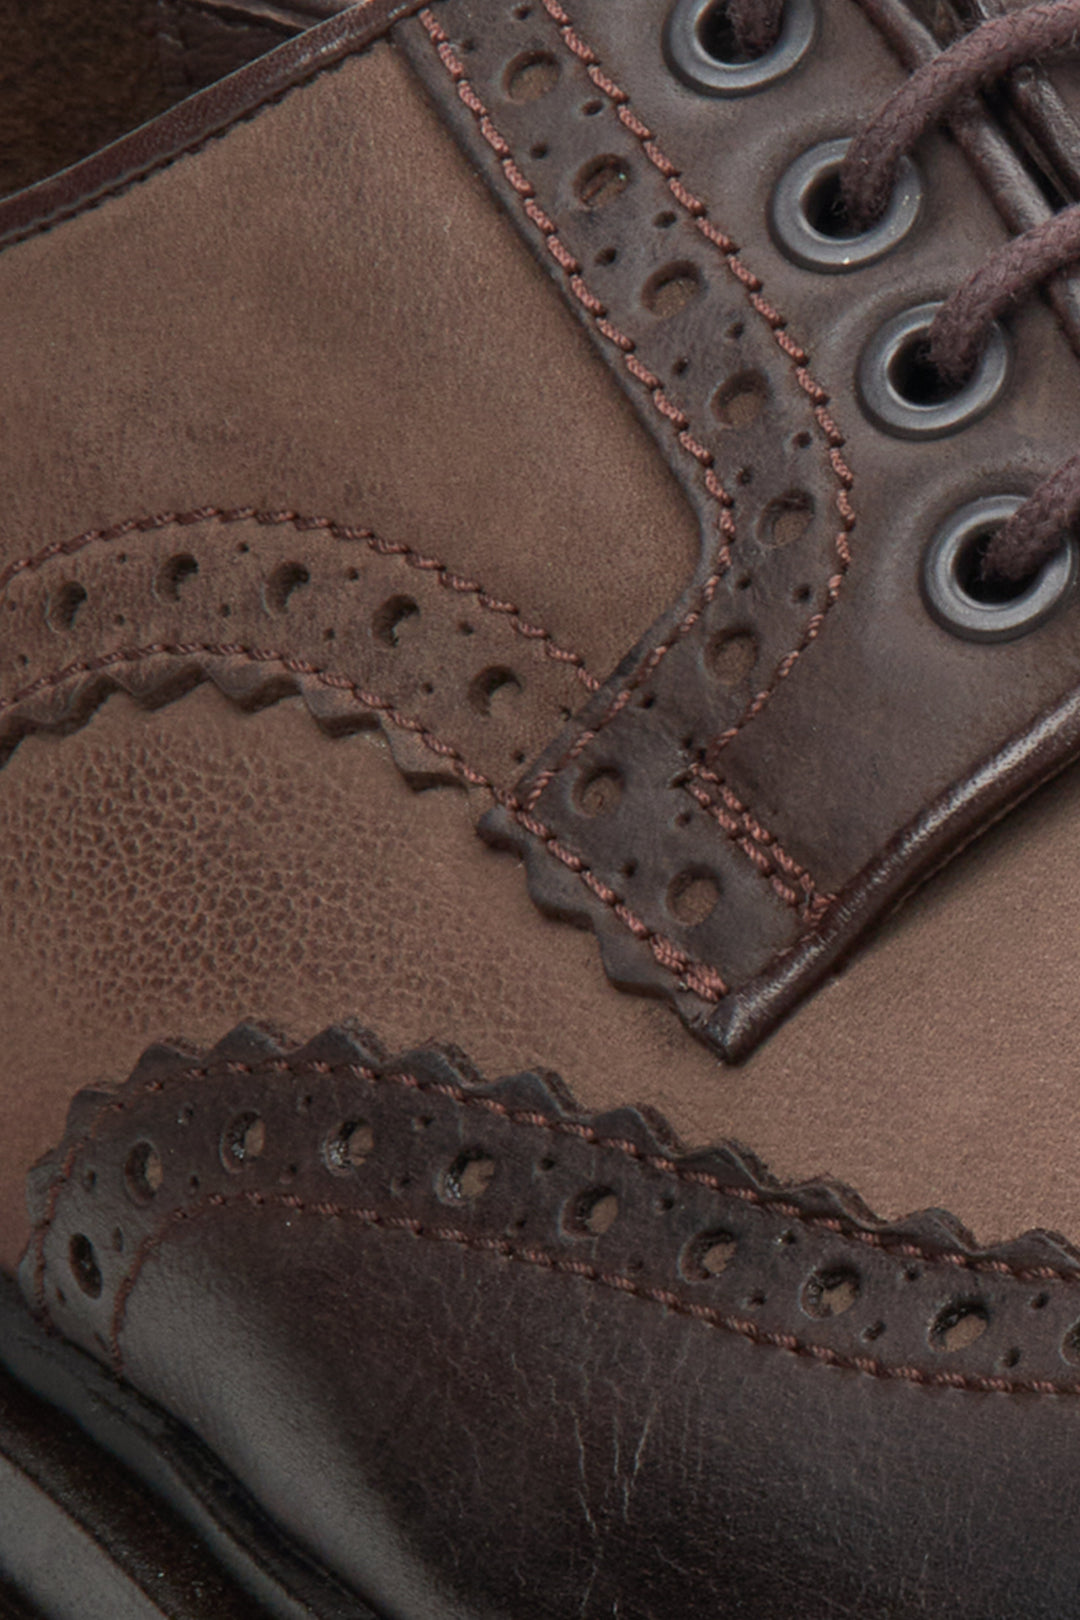 Men's brown leather oxford shoes - close-up on the detail.